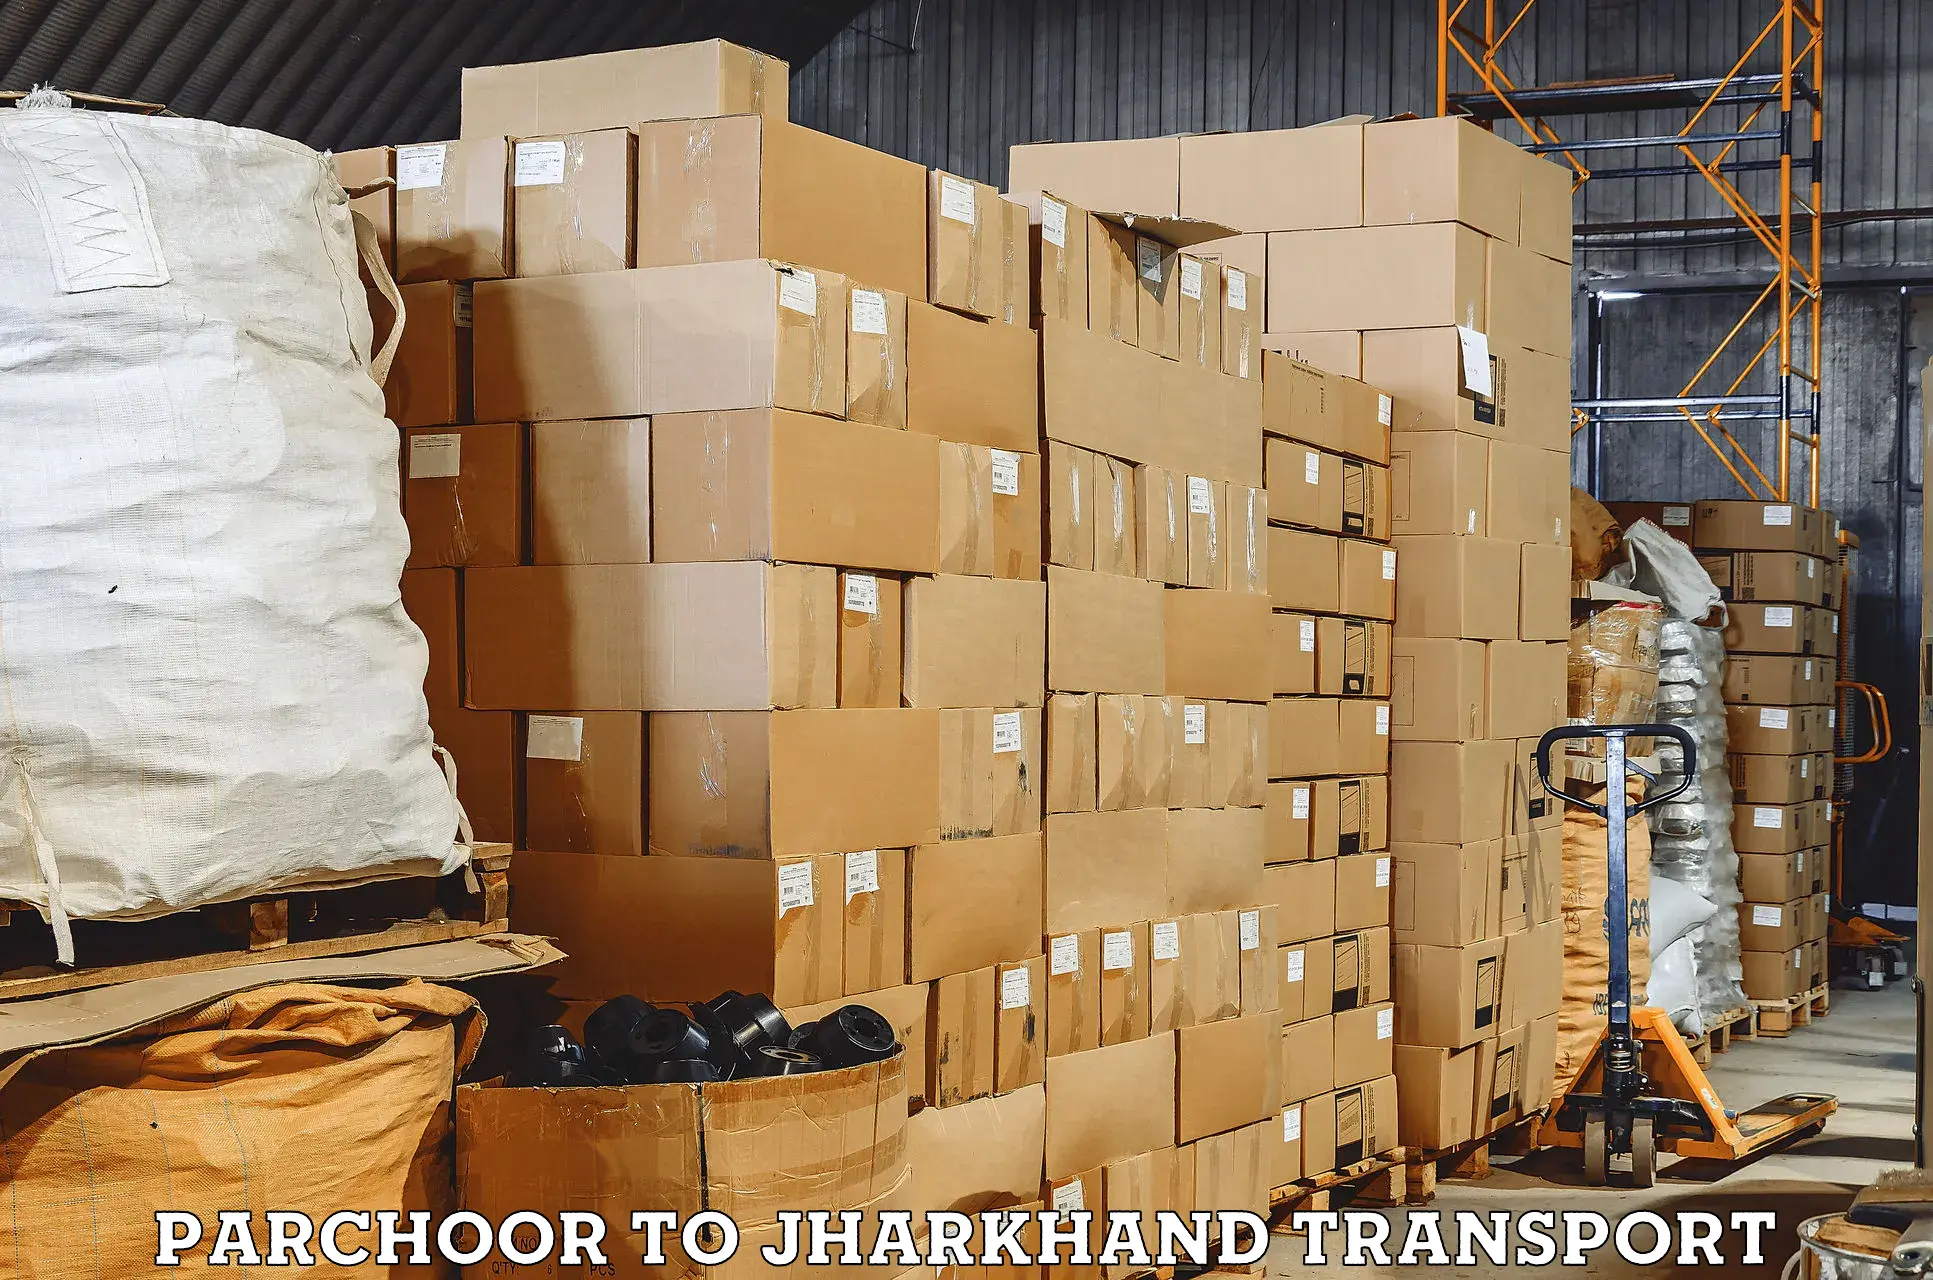 Truck transport companies in India Parchoor to Jharkhand